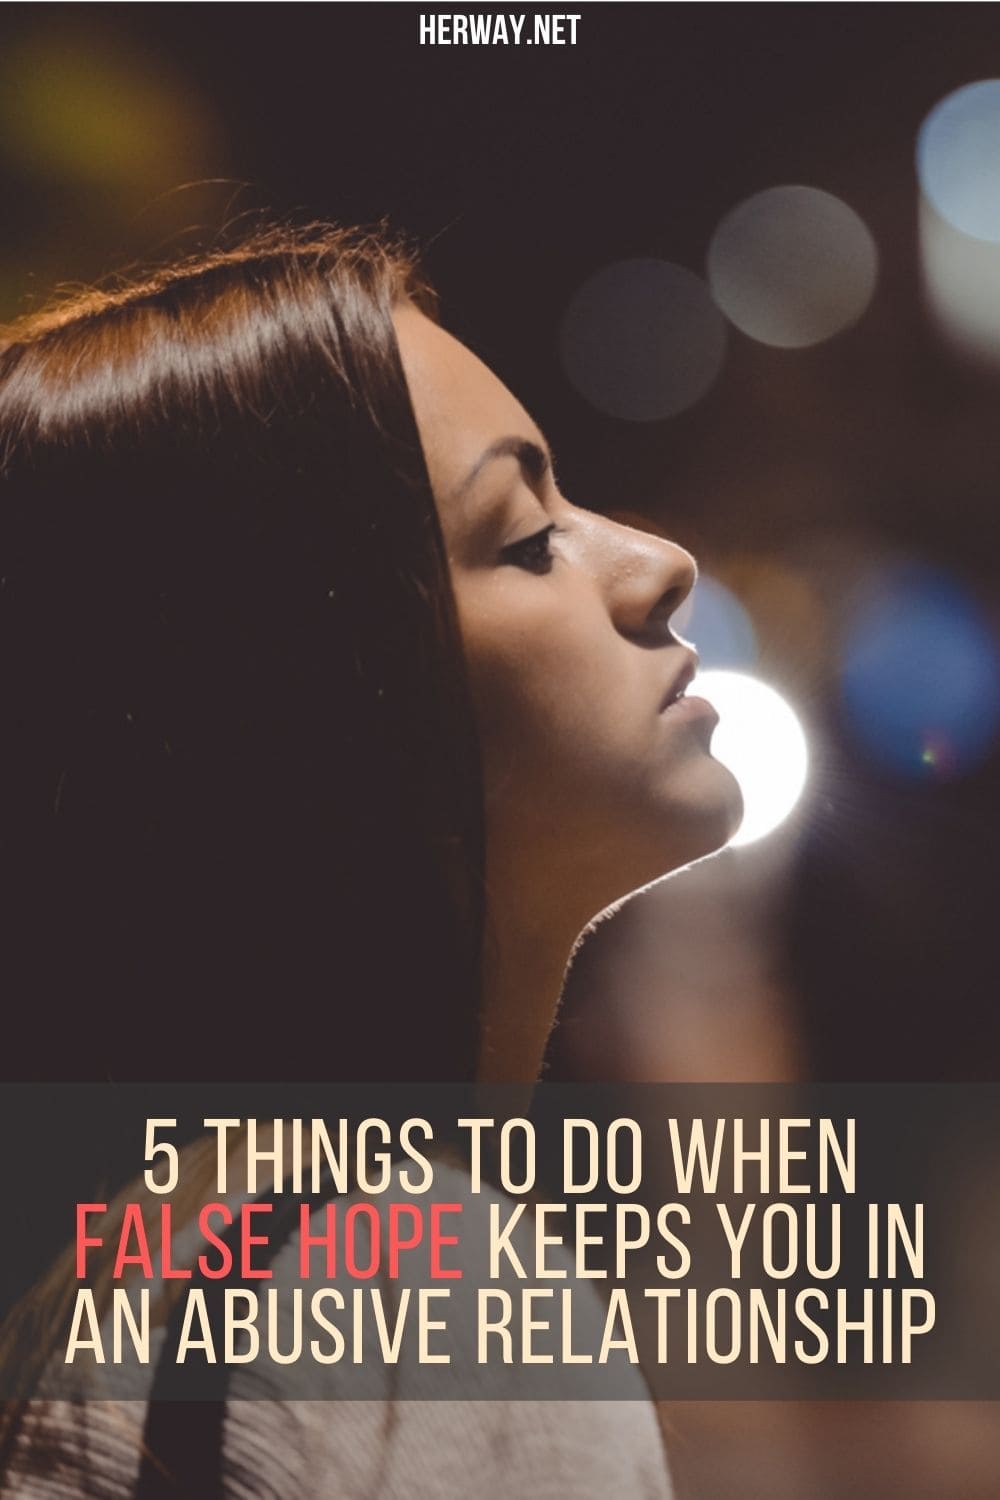 5 Things To Do When False Hope Keeps You In An Abusive Relationship